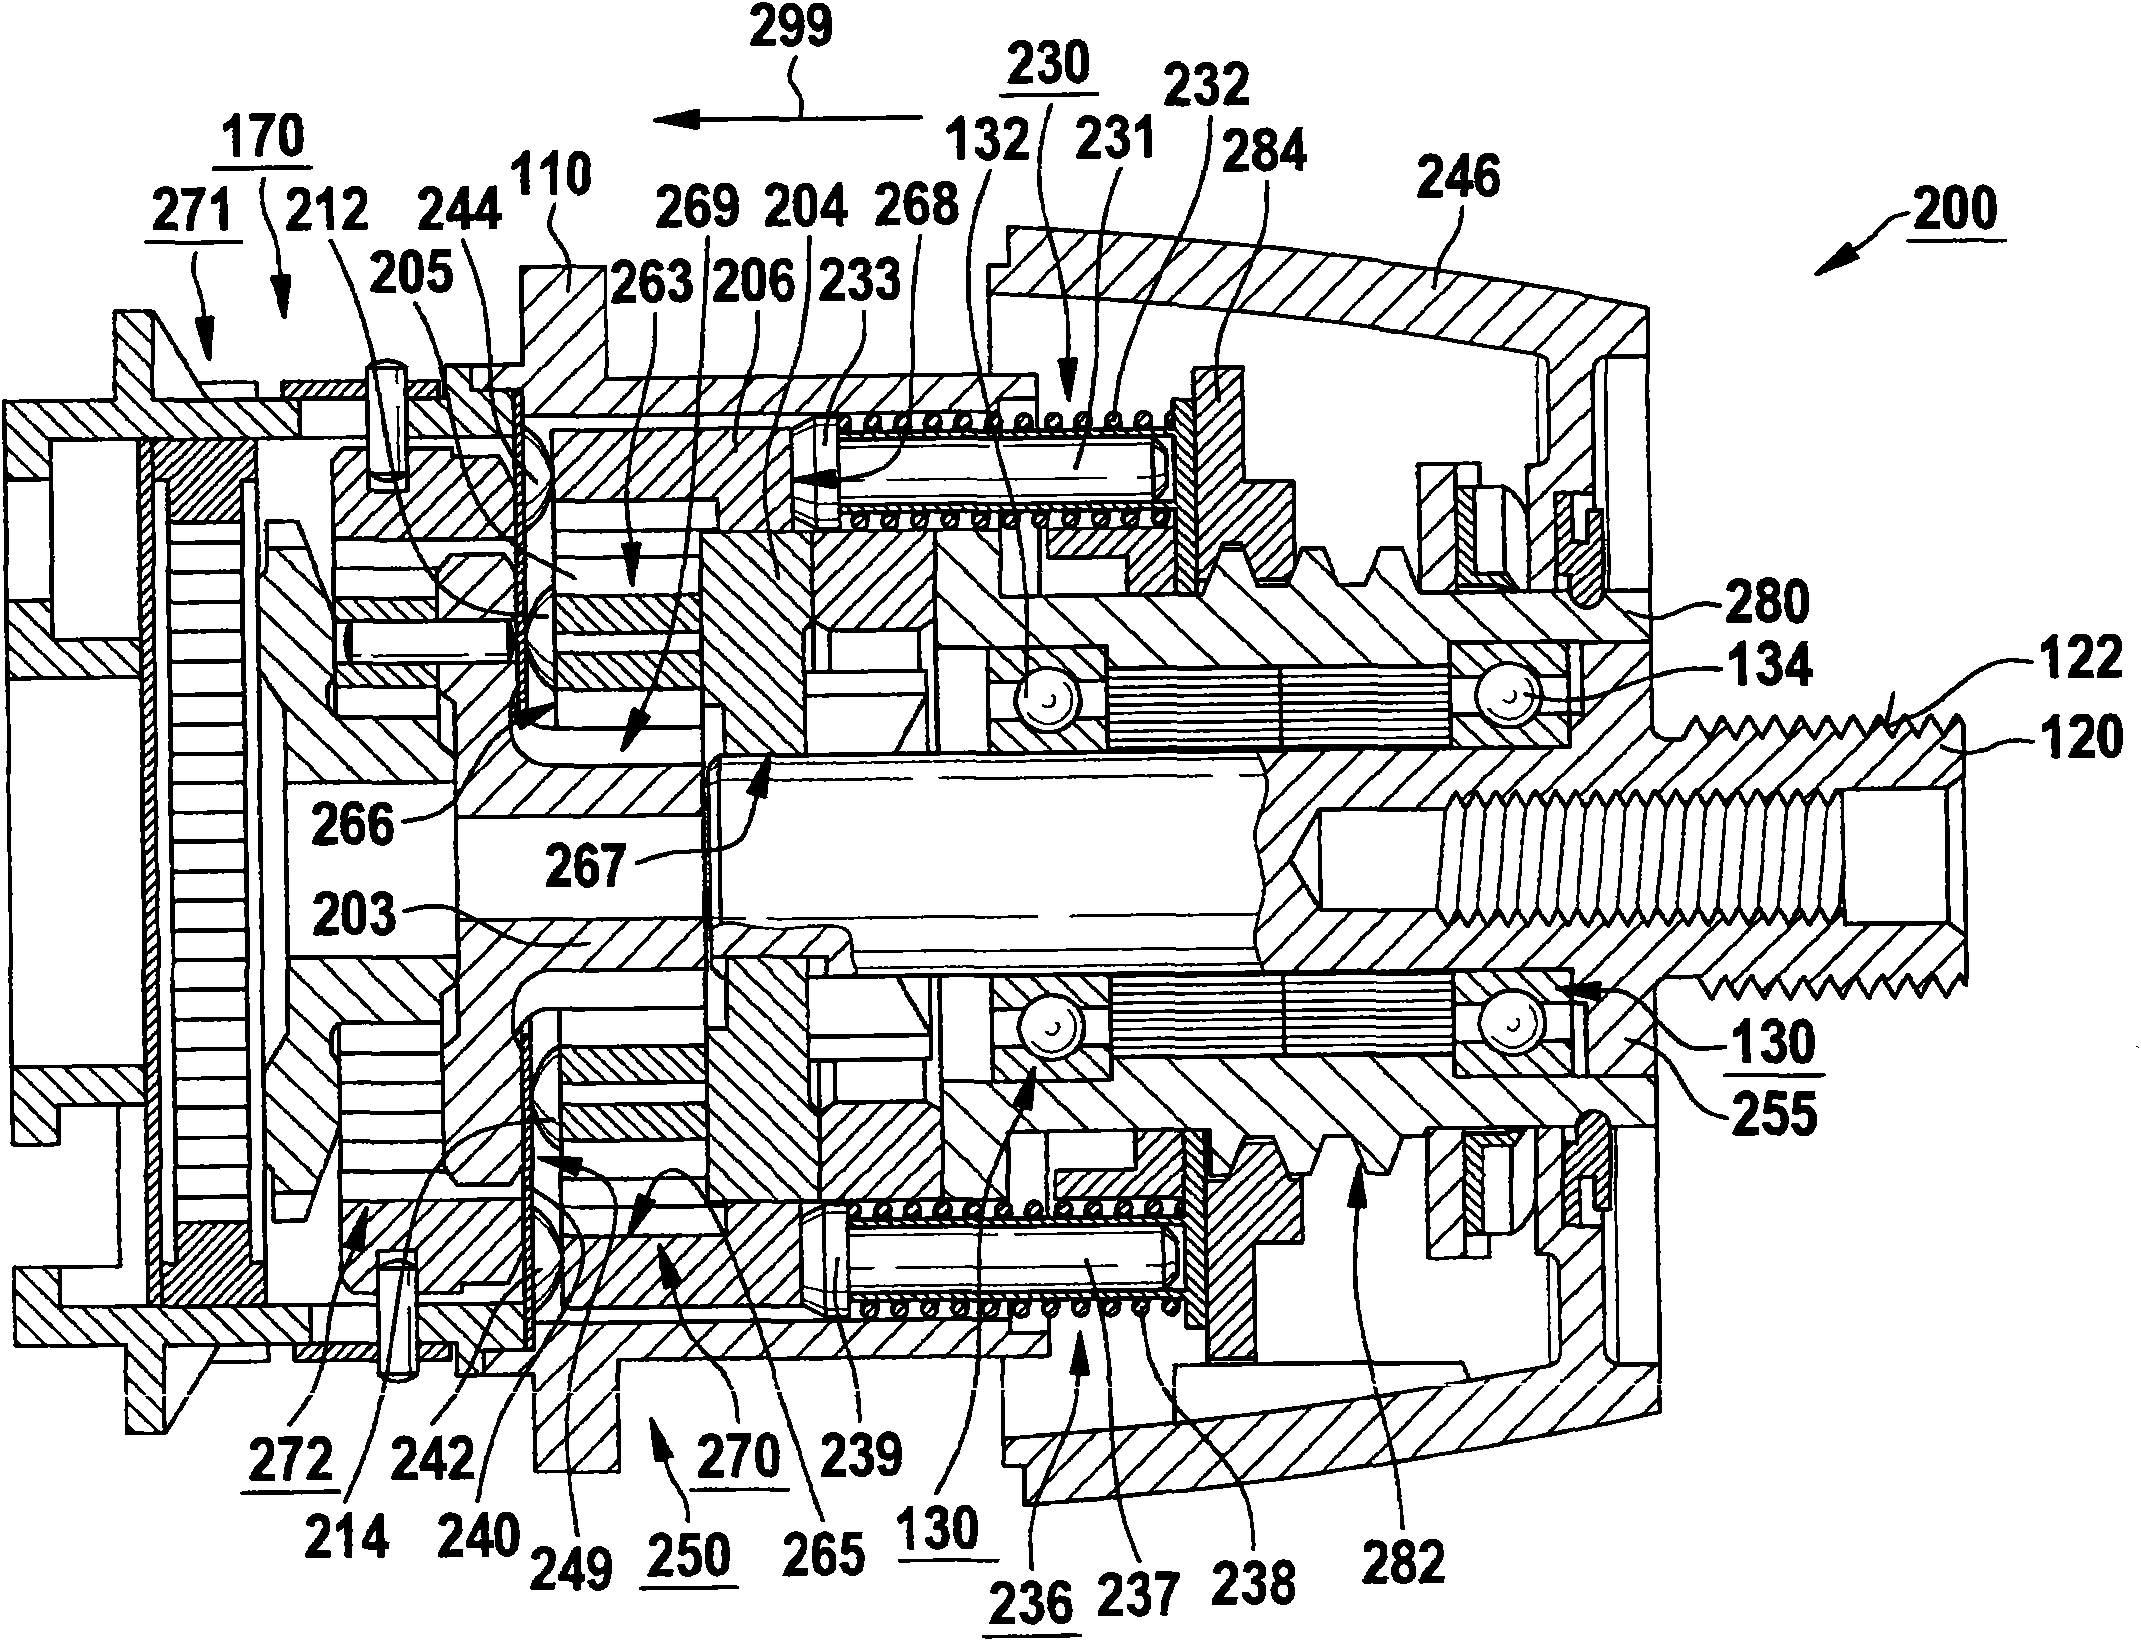 Hand-guided power tool having a torque coupling